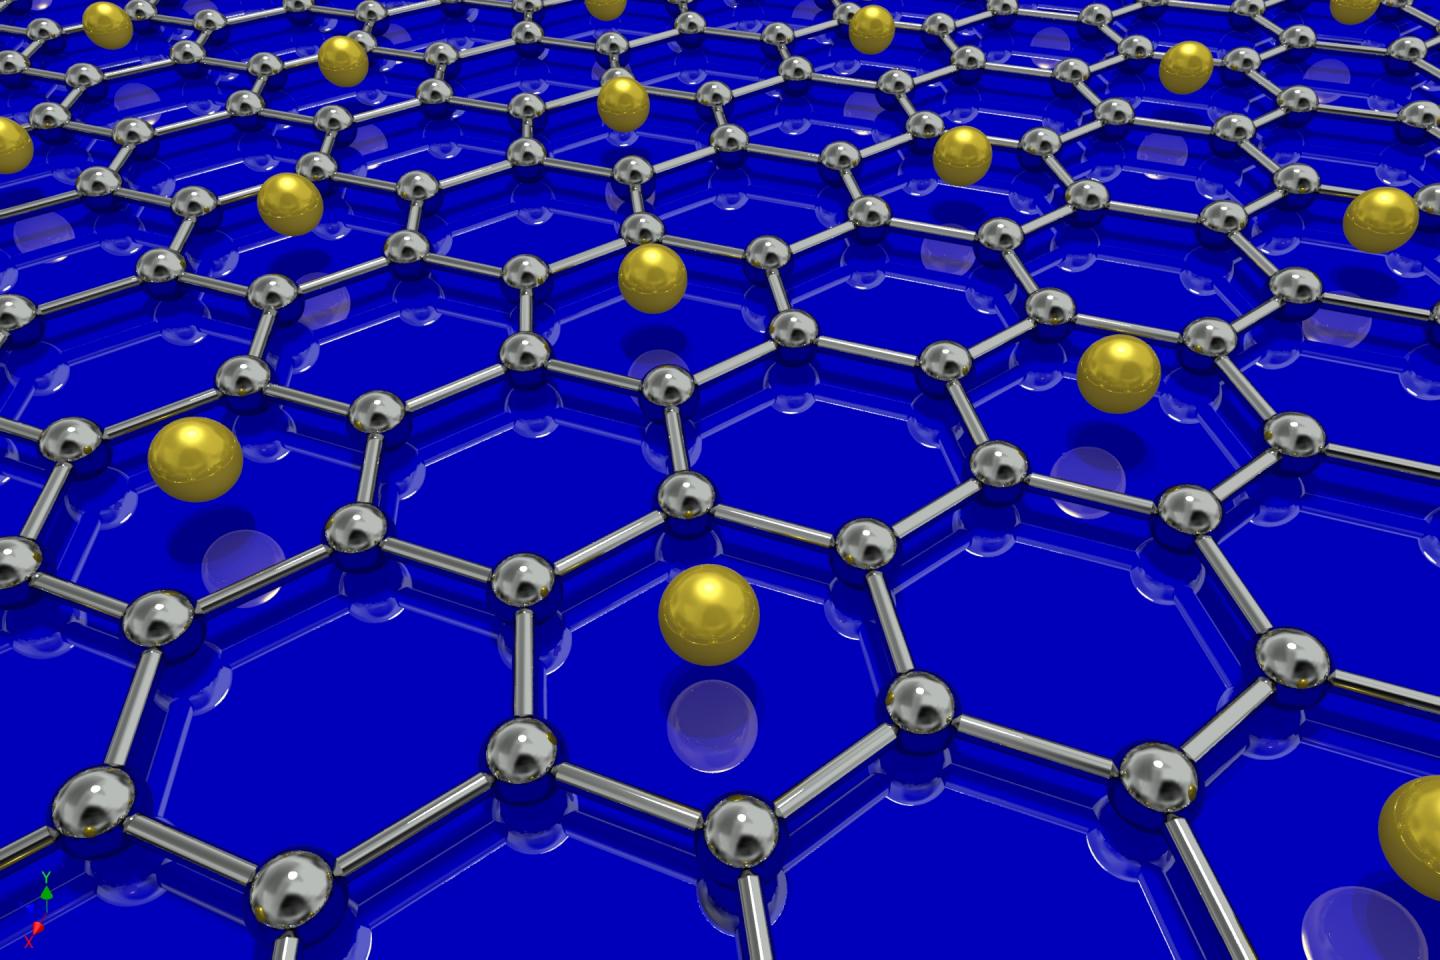 Graphene Sample Coated with Lithium Atoms